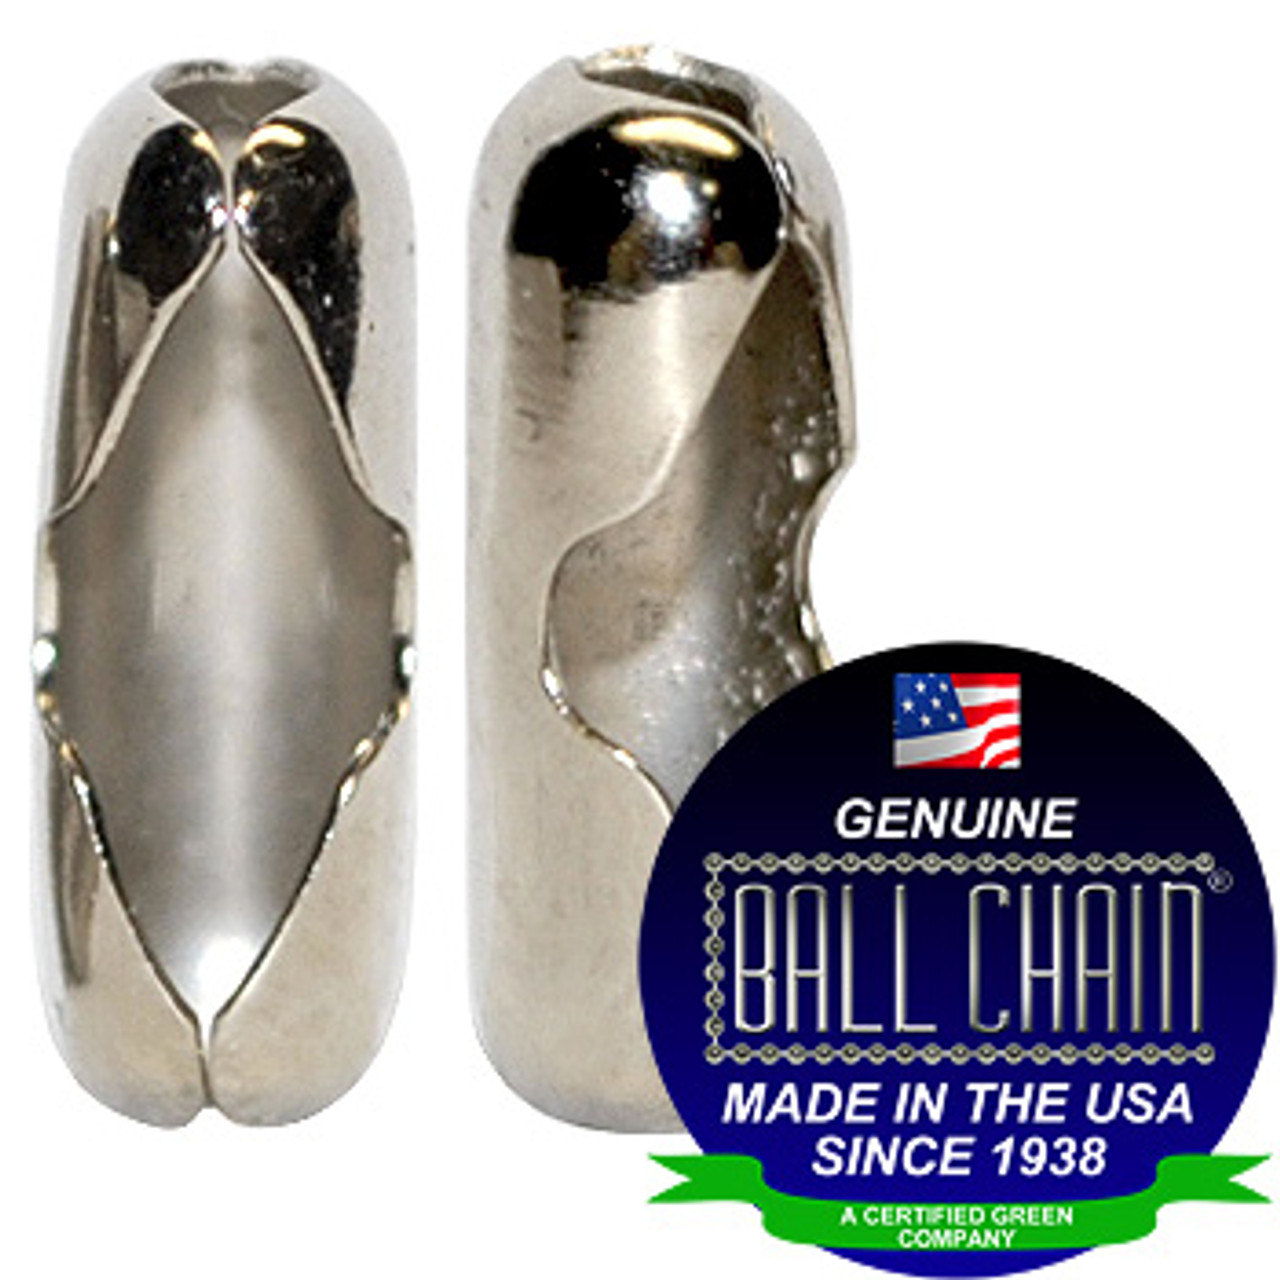 Two #6 Nickel Plated Brass Connectors with Ball Chain Manufacturing seal stating "Made in the usa since 1938" and "certified green business".